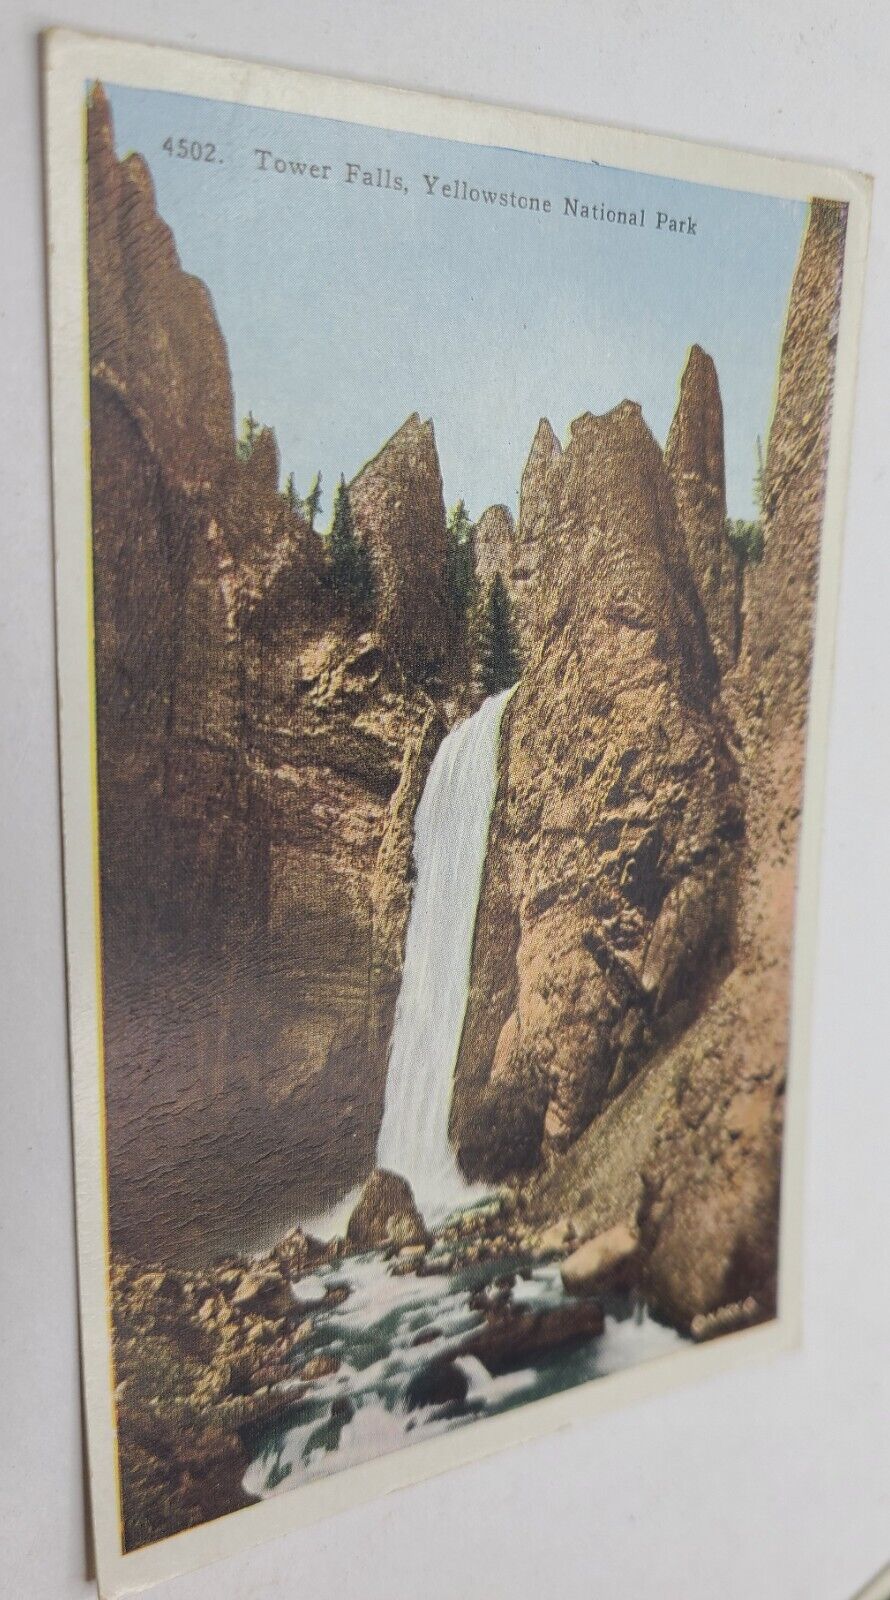 Vintage Yellowstone National Park Tower Falls Lithograph Photo Postcard